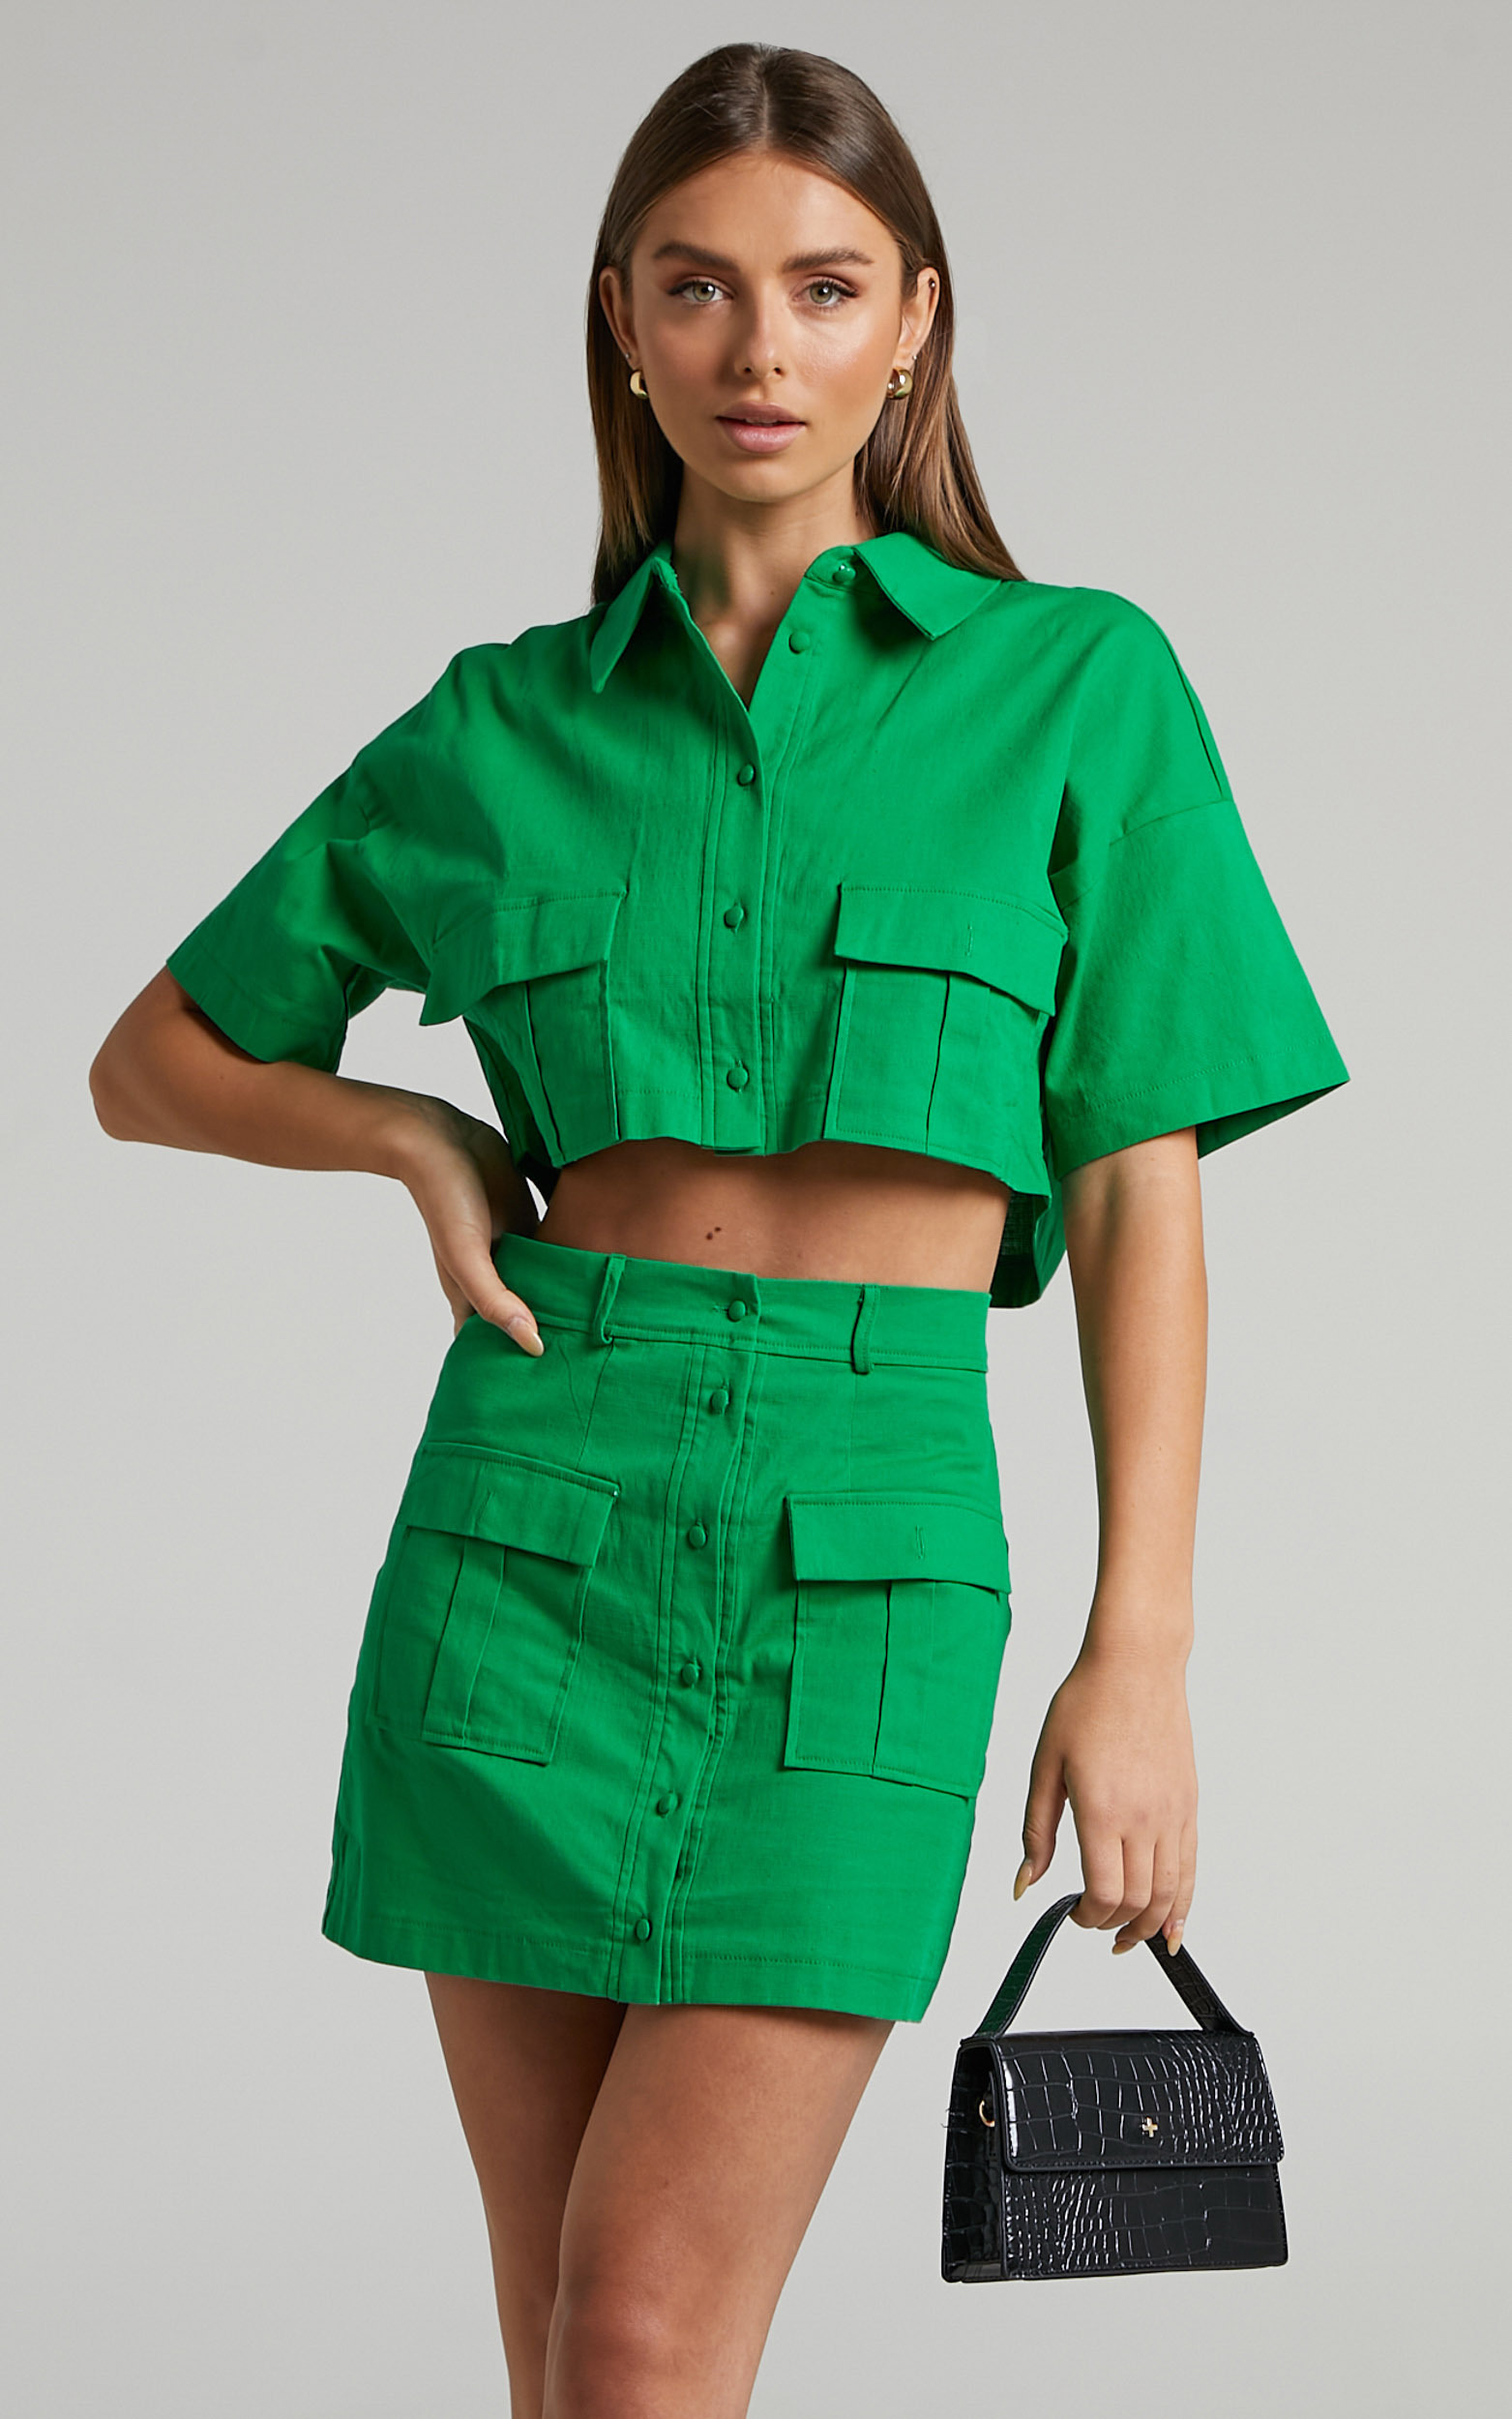 Navine Button Front Crop Top and Cargo Pocket Mini Skirt Two Piece Set in Green - 04, GRN1, hi-res image number null